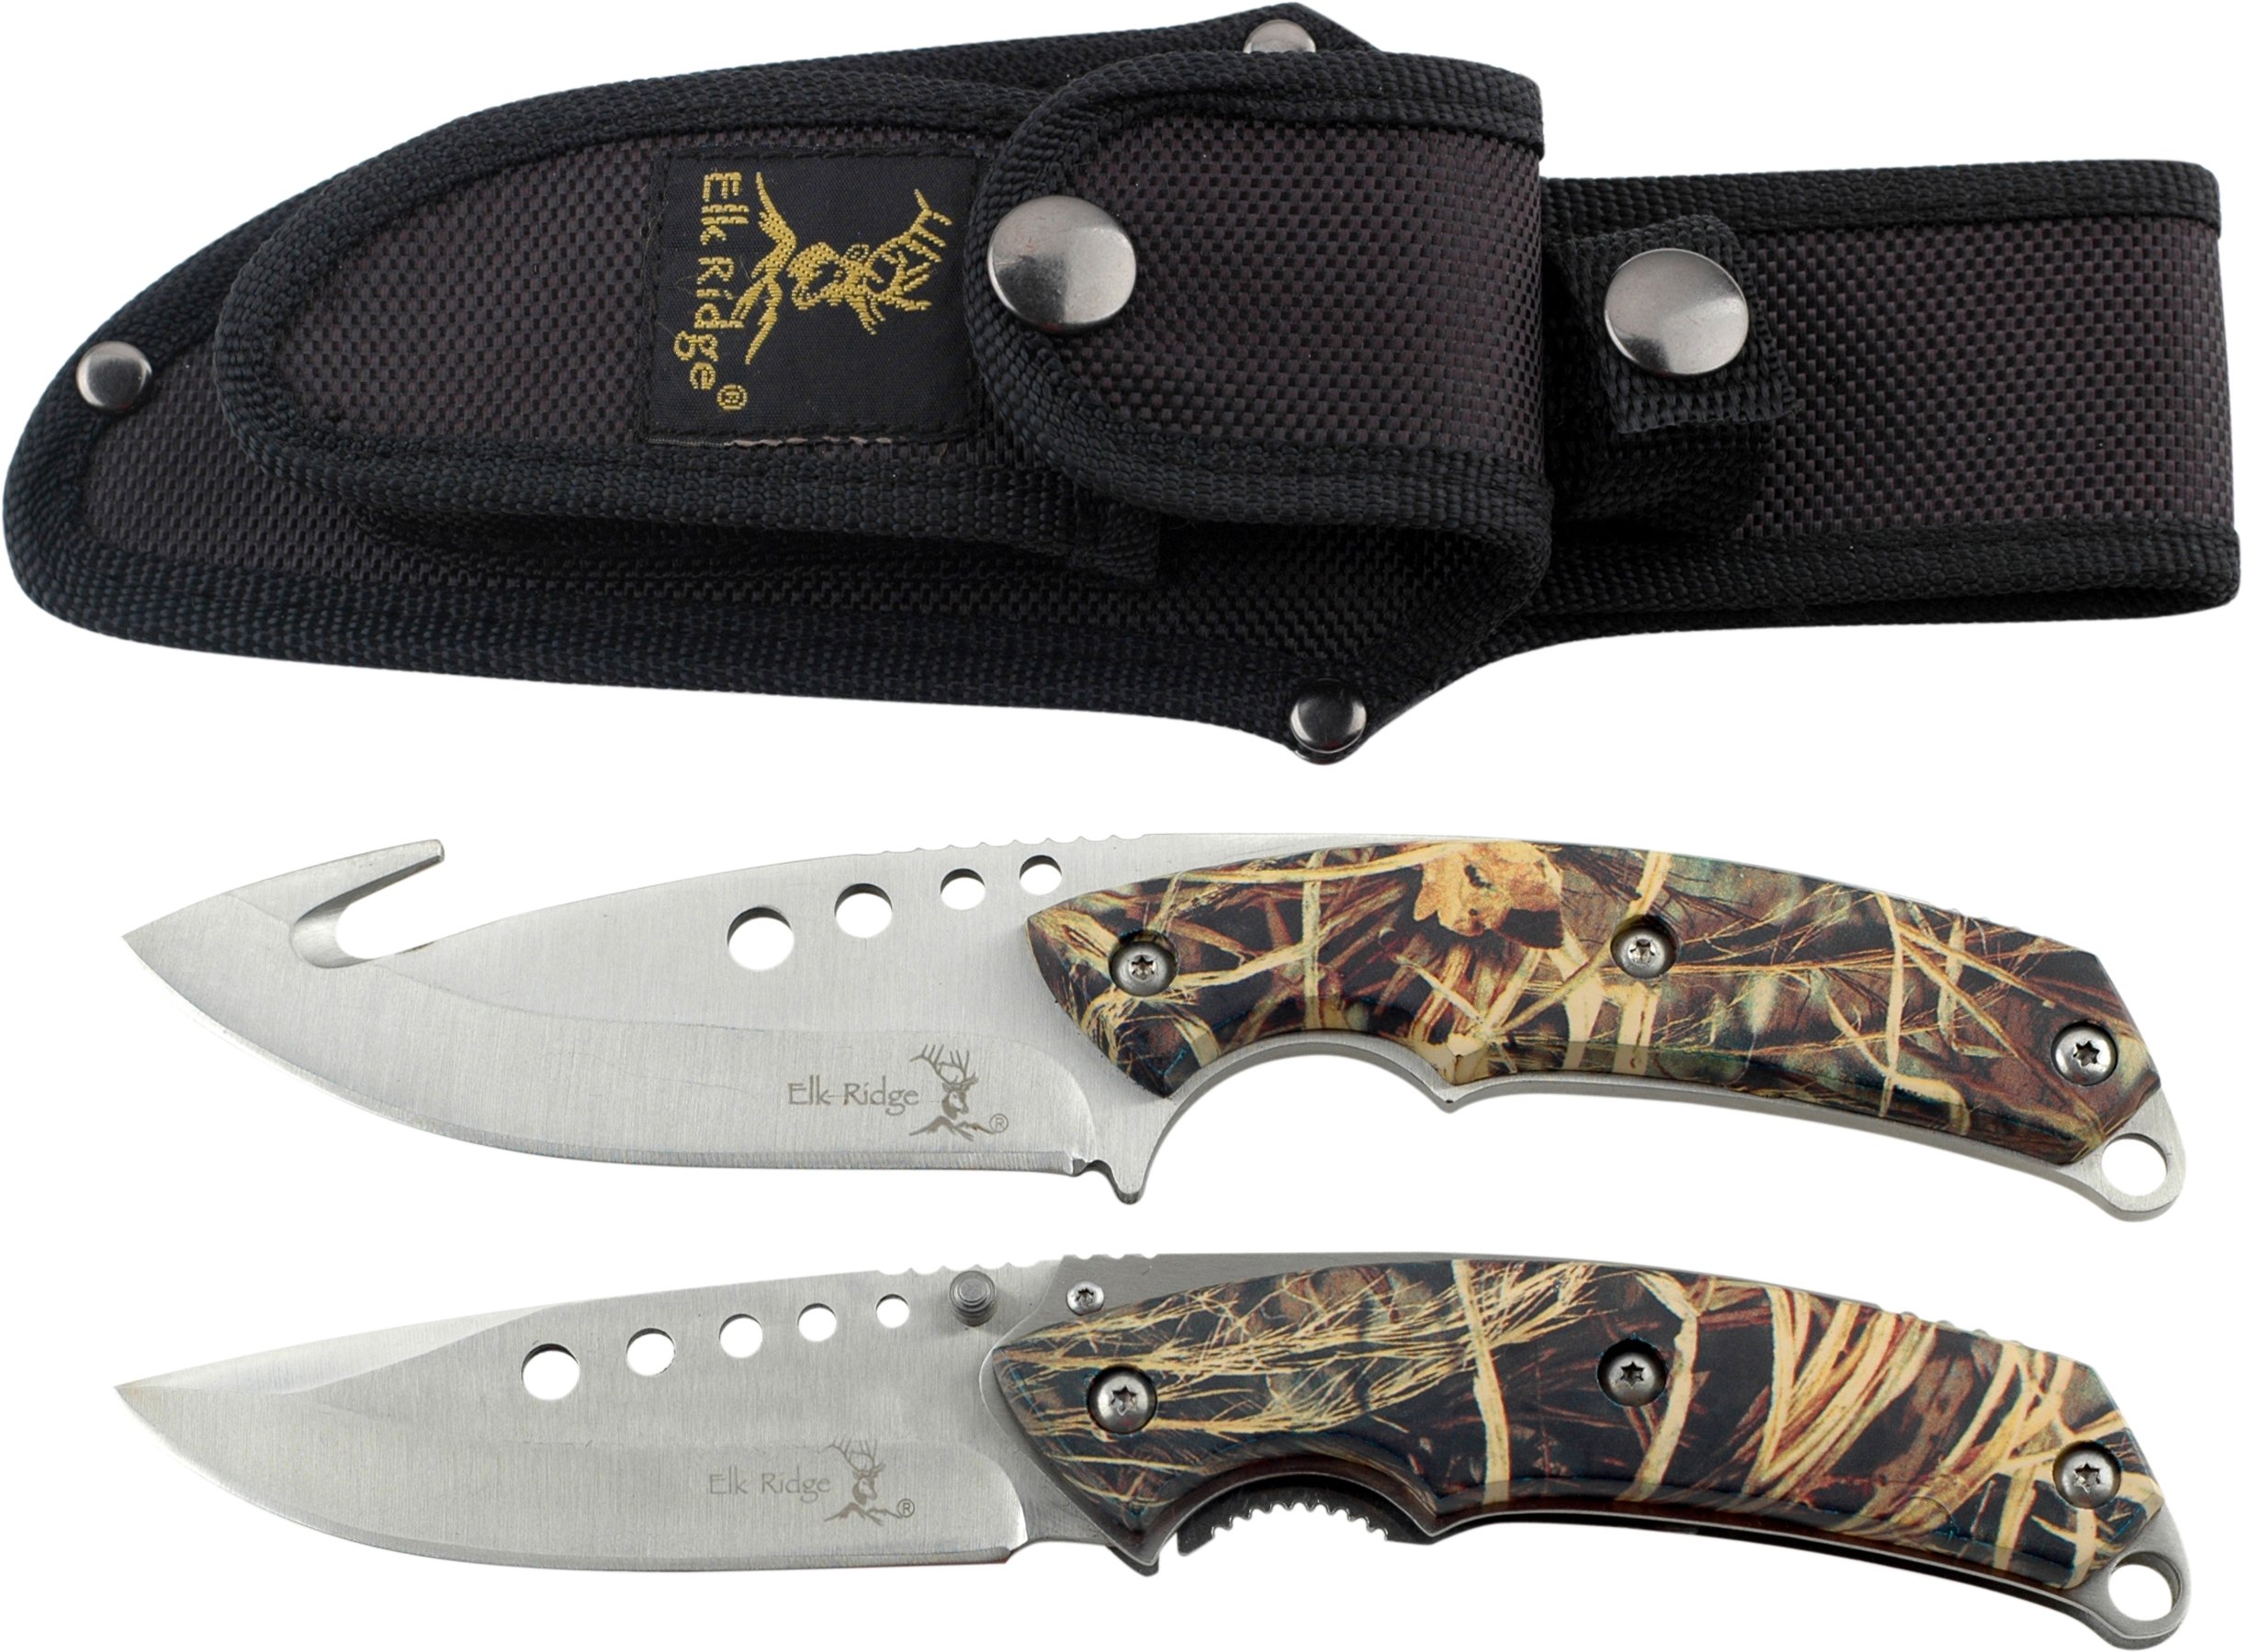 Where to Buy Hunting Knives Online